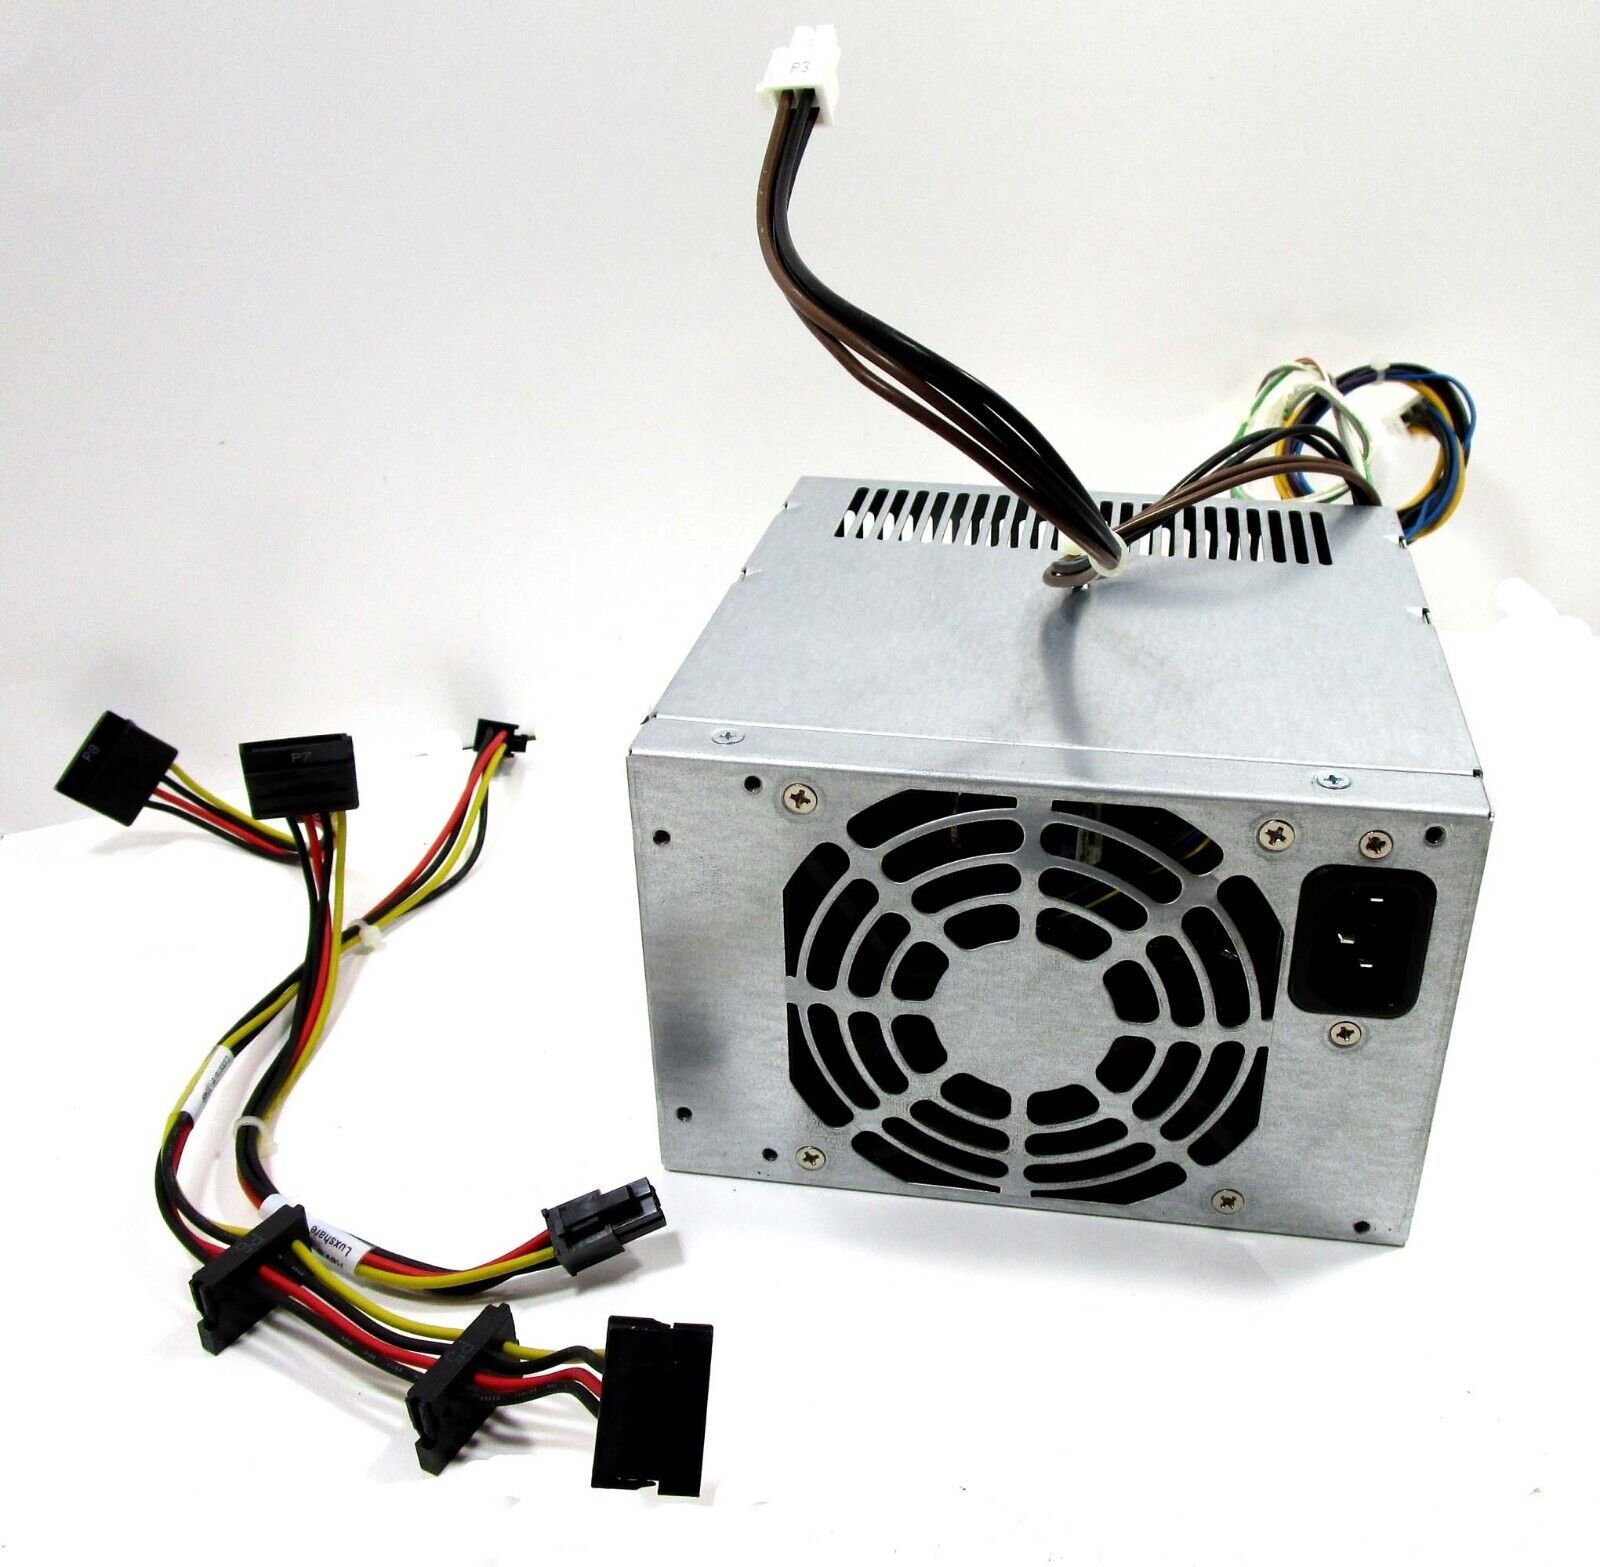 HP COMPAQ 8200 Elite PS-4321-1HB Replacement Power Supply 320W ATX12V 611483-001